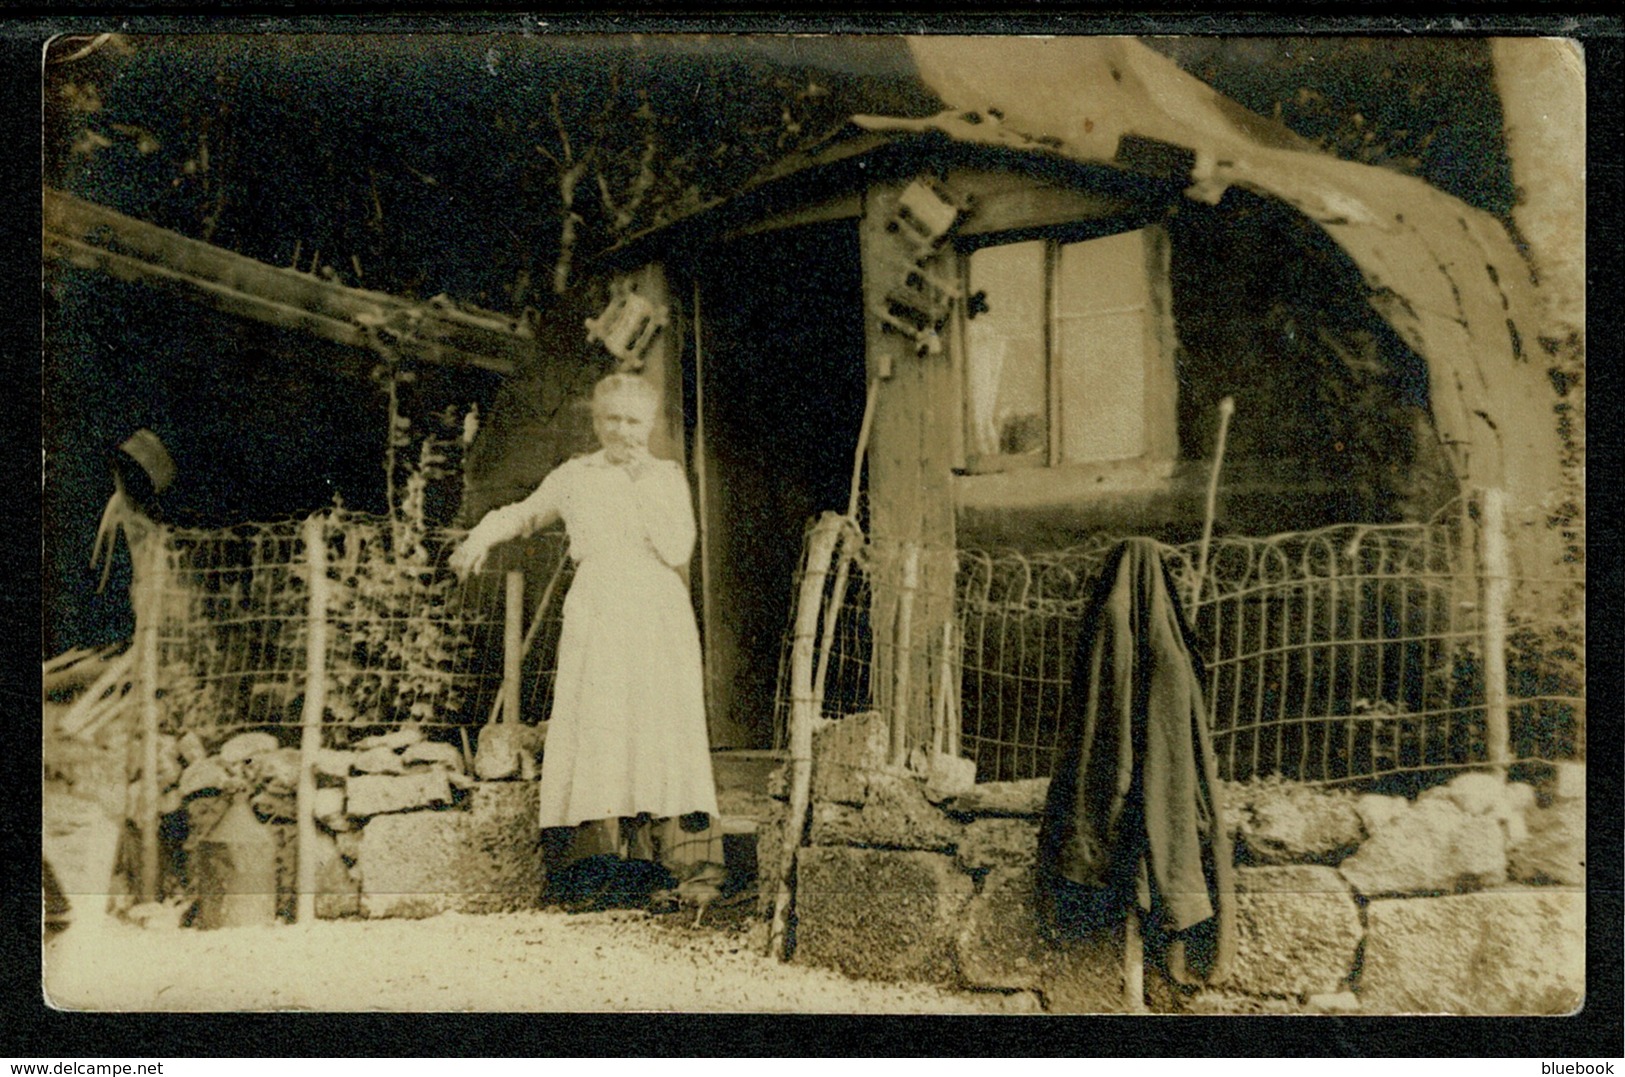 Ref 1303 - Early Ethnic Social Real Photo Postcard - Old Woman Outside Cabin - Helensburgh Argyll & Bute - Europe